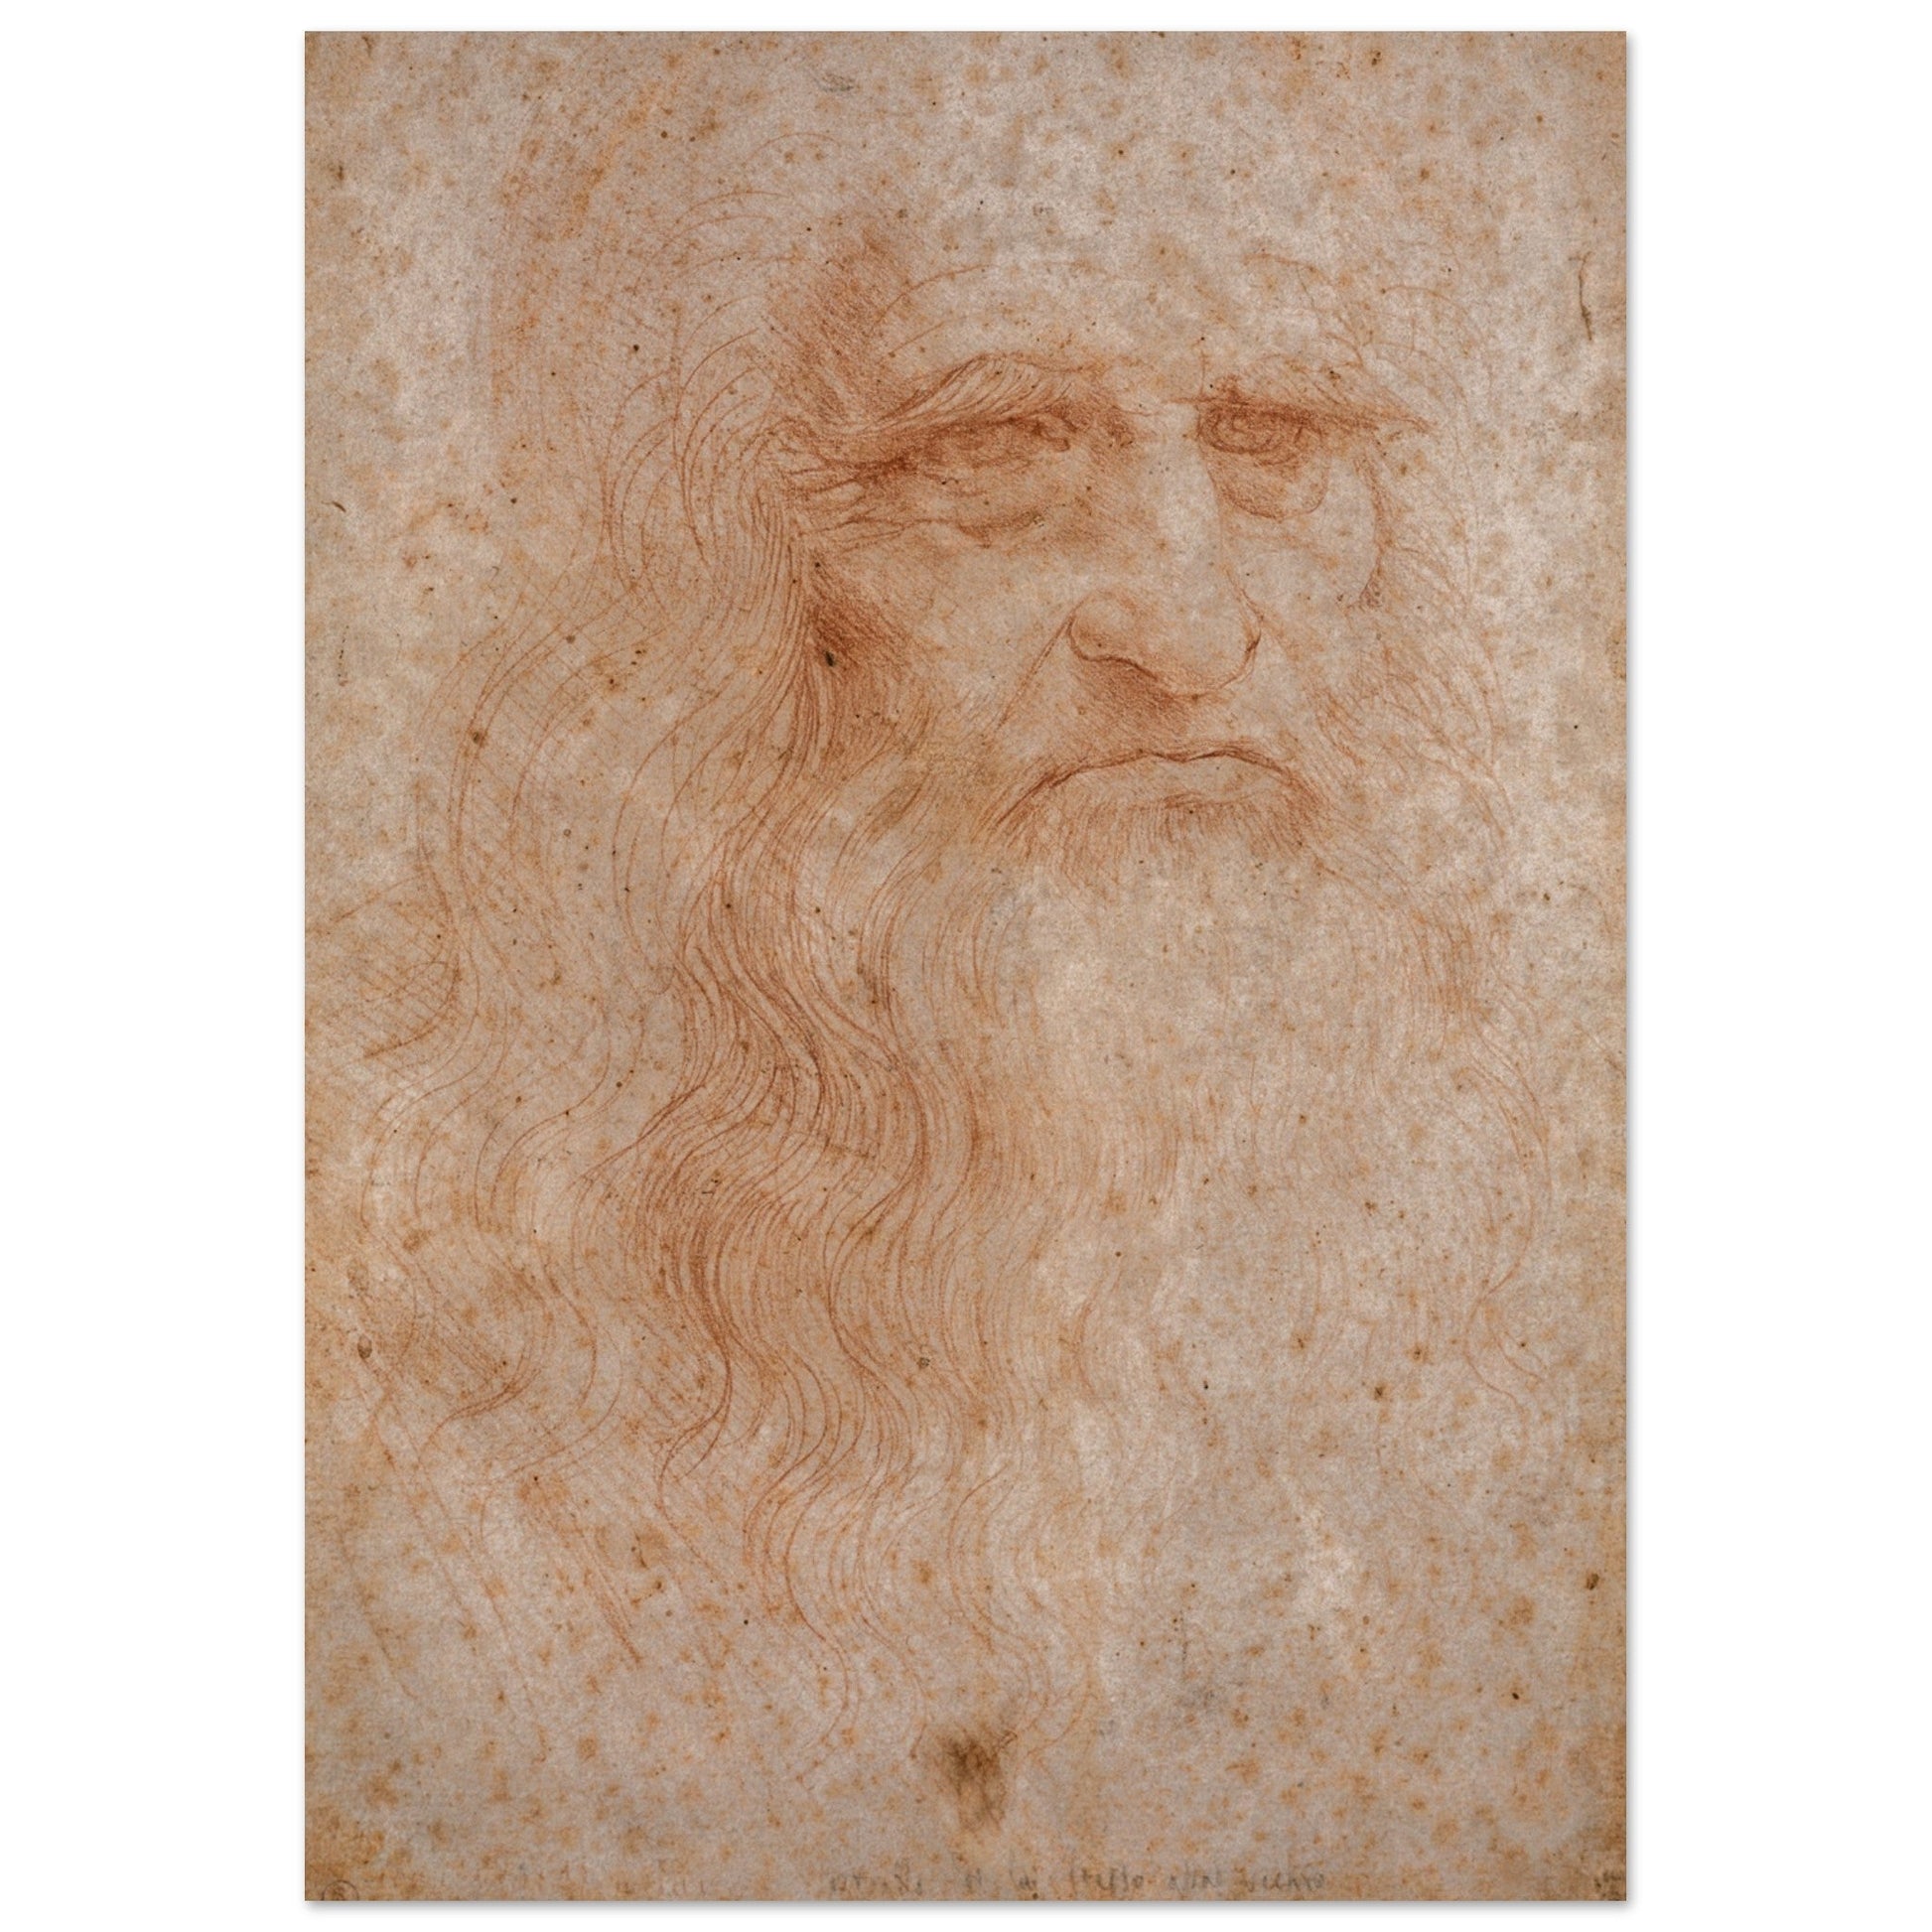 High Quality Posters of Self-portrait in Red Chalk for Room.